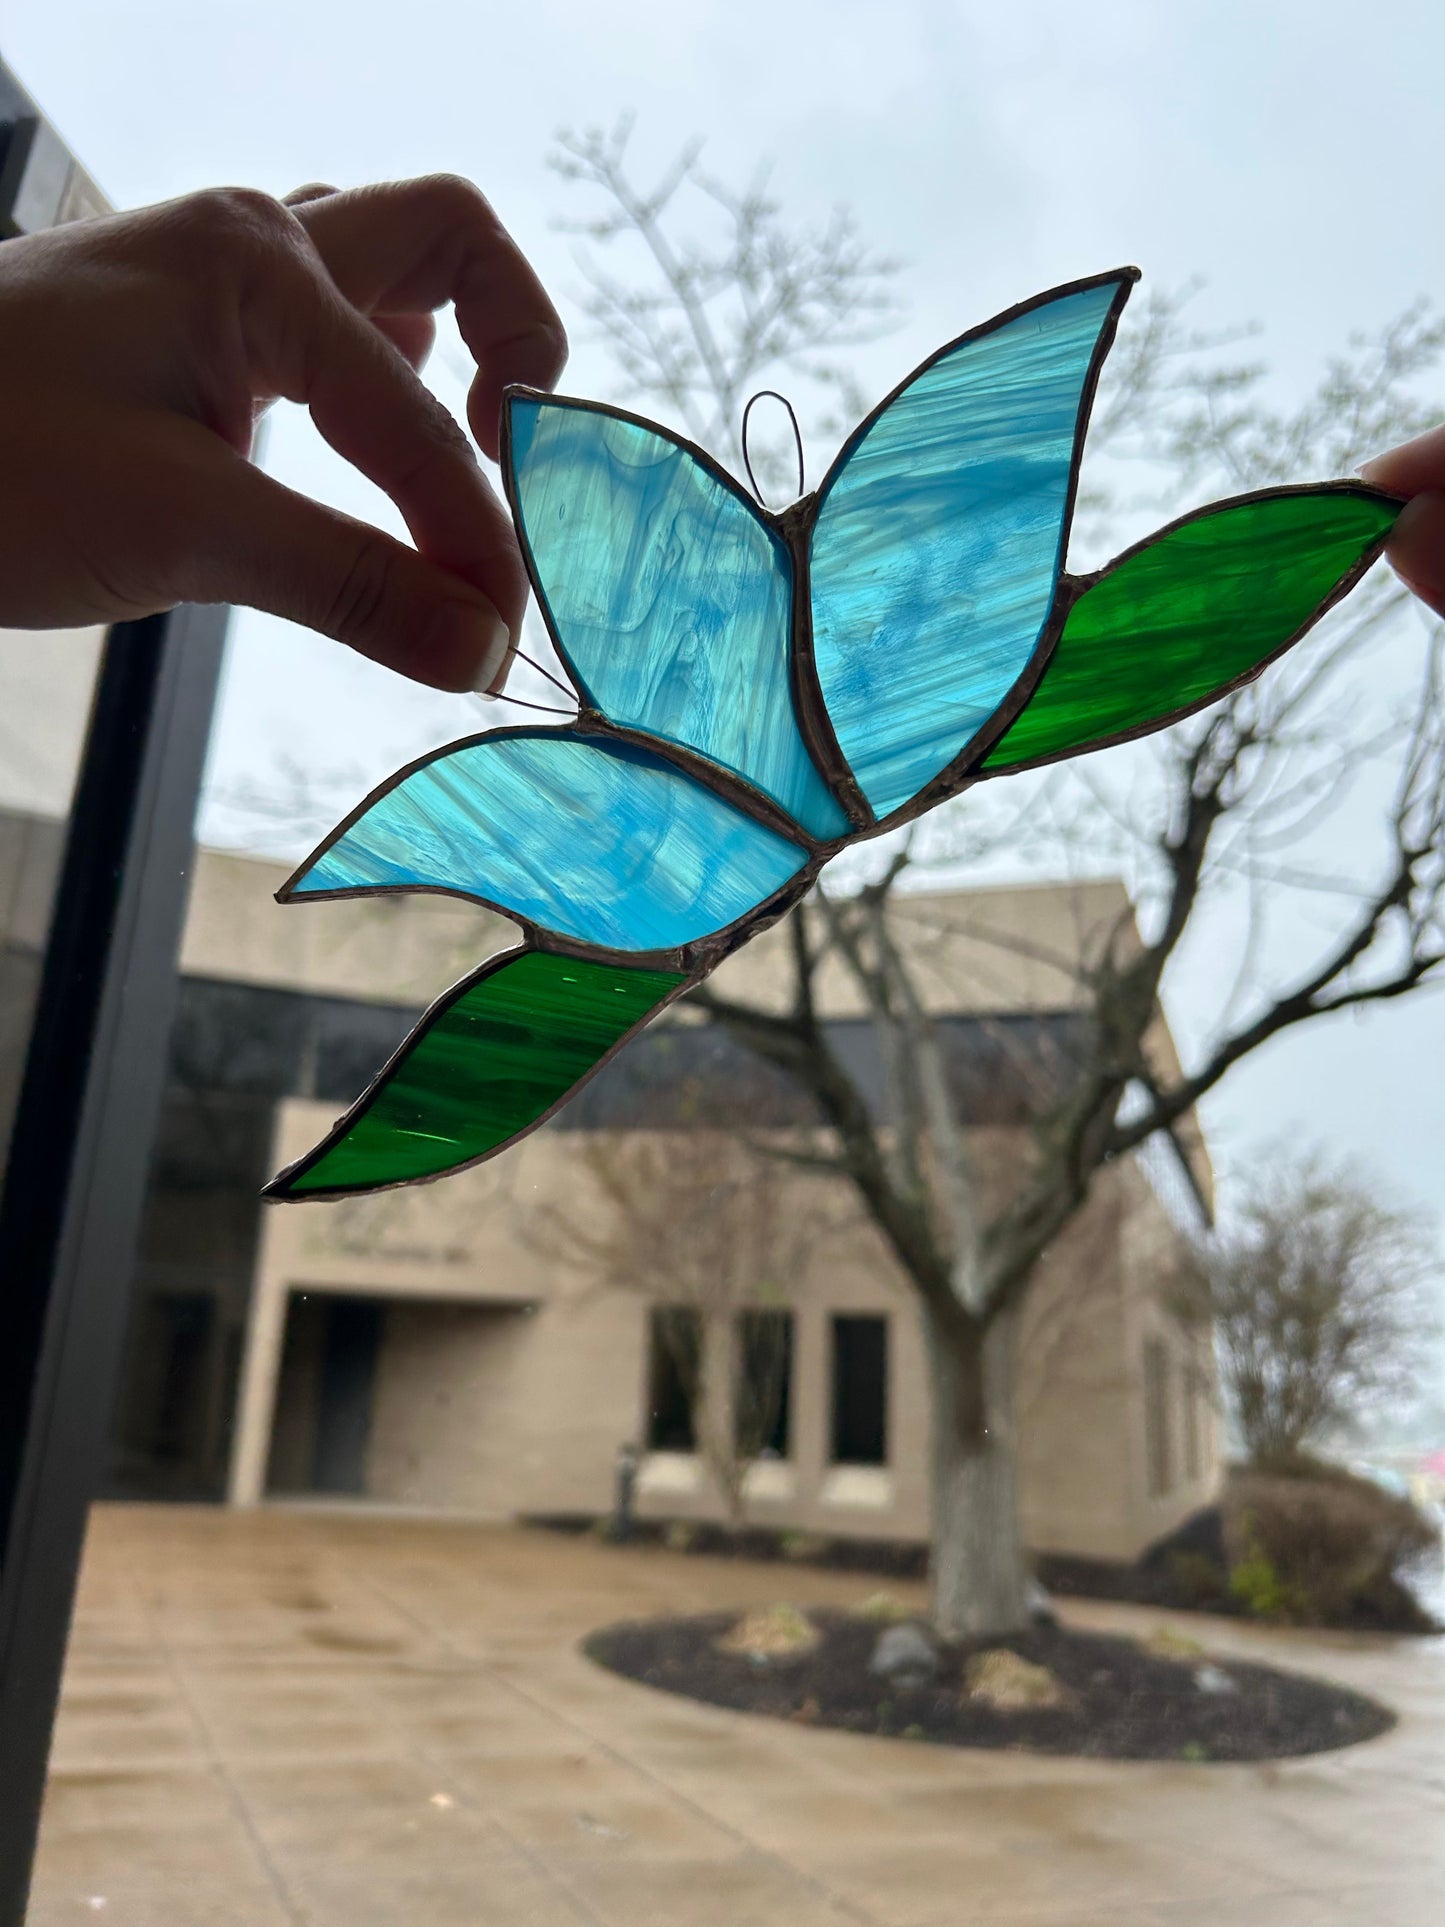 Beginner Stained Glass class, April 11, 11-1:30 pm